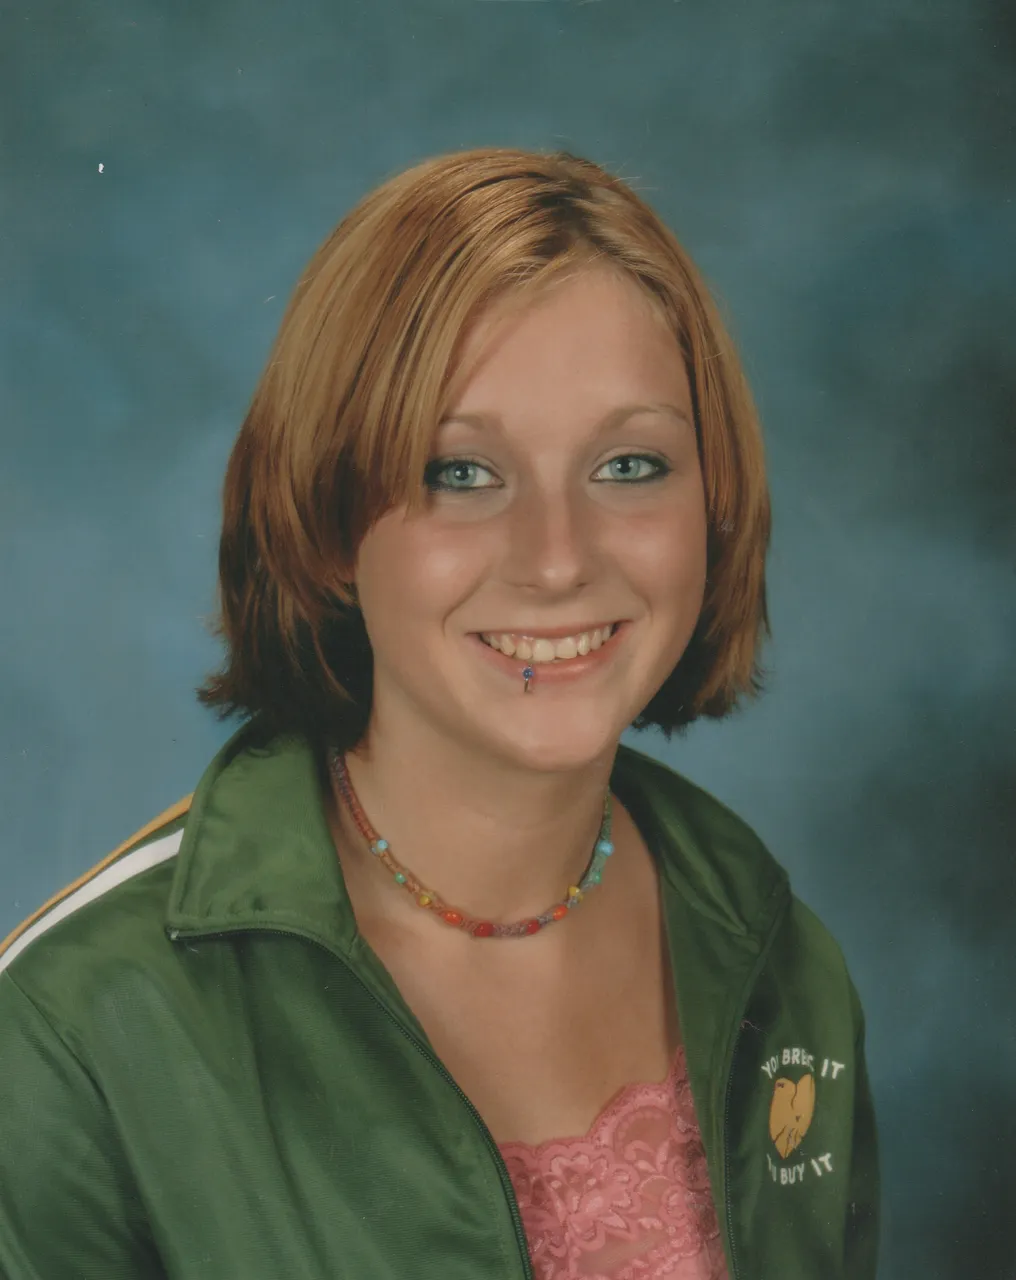 2004 maybe - Crystal Arnold School Photo - Not sure which year ok.png